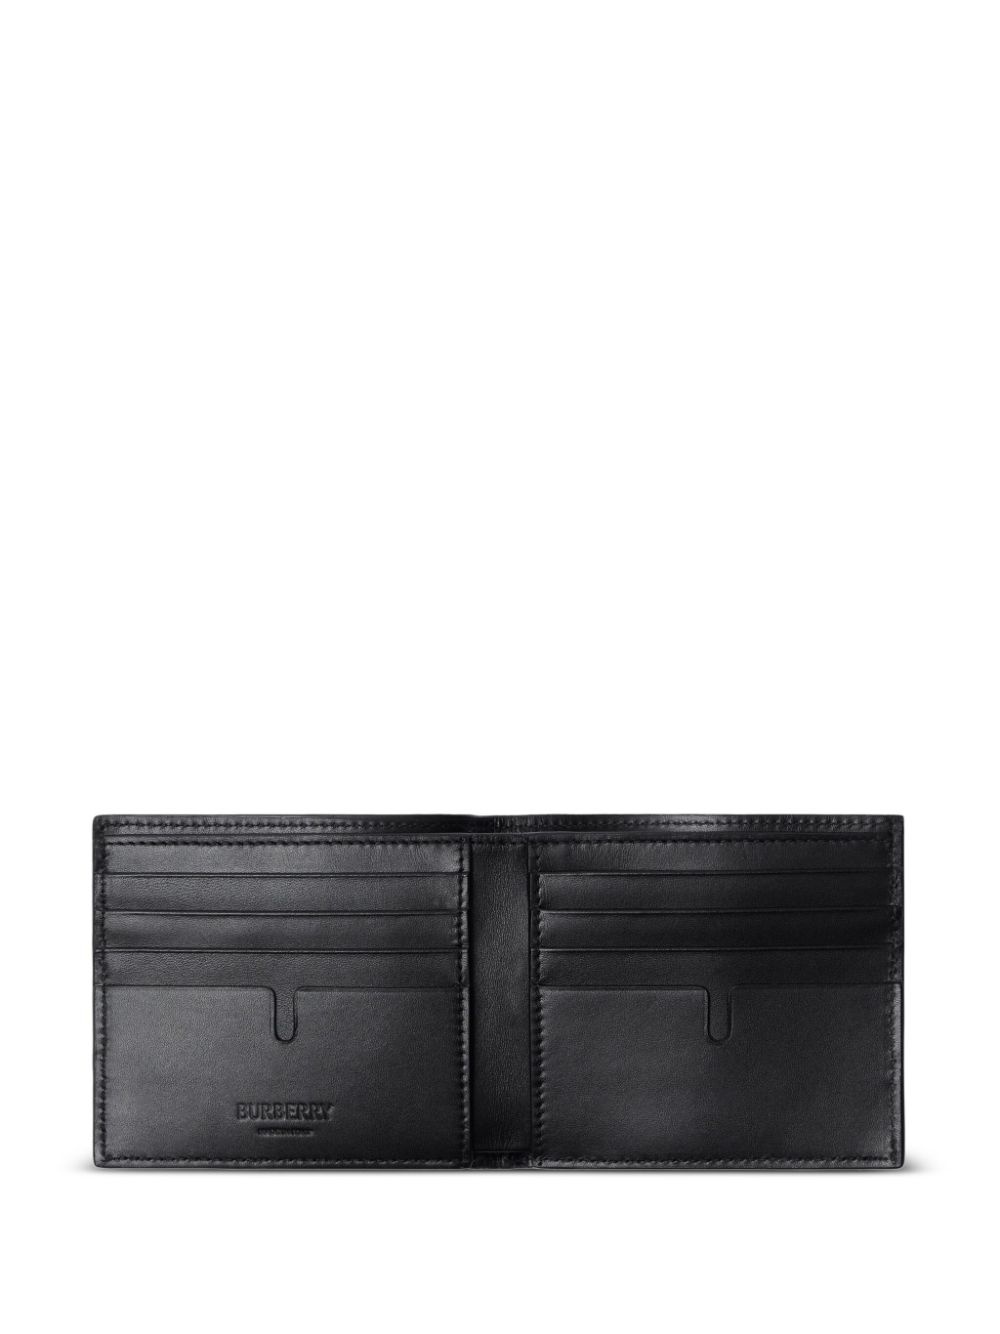 embossed-check leather wallet - 3